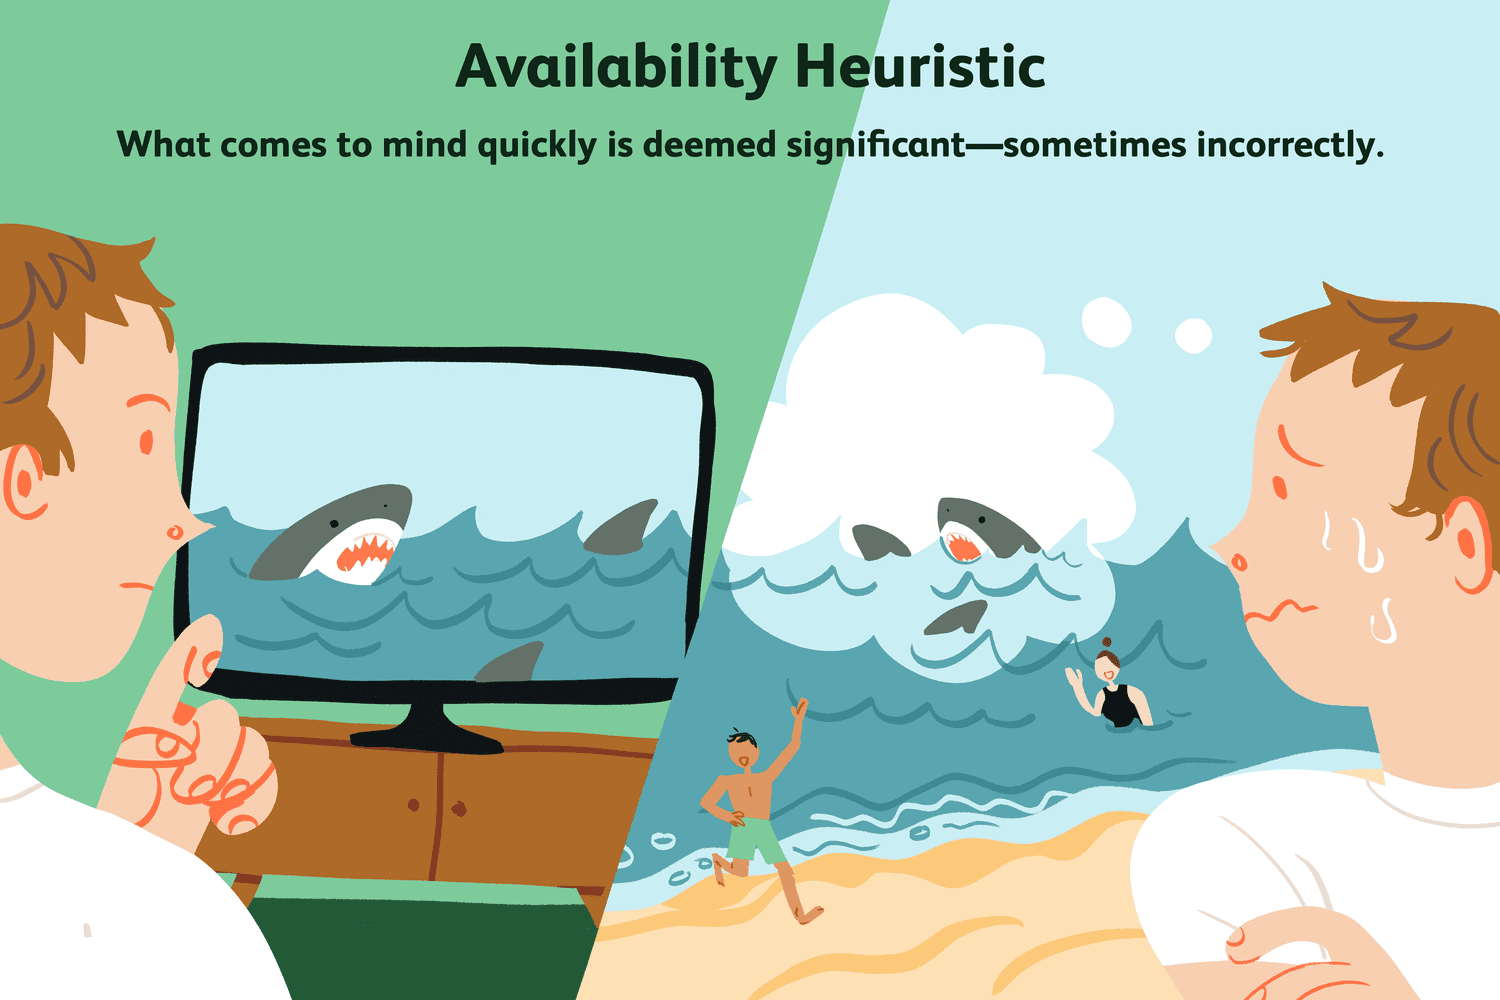 Availability Heuristic illustrations